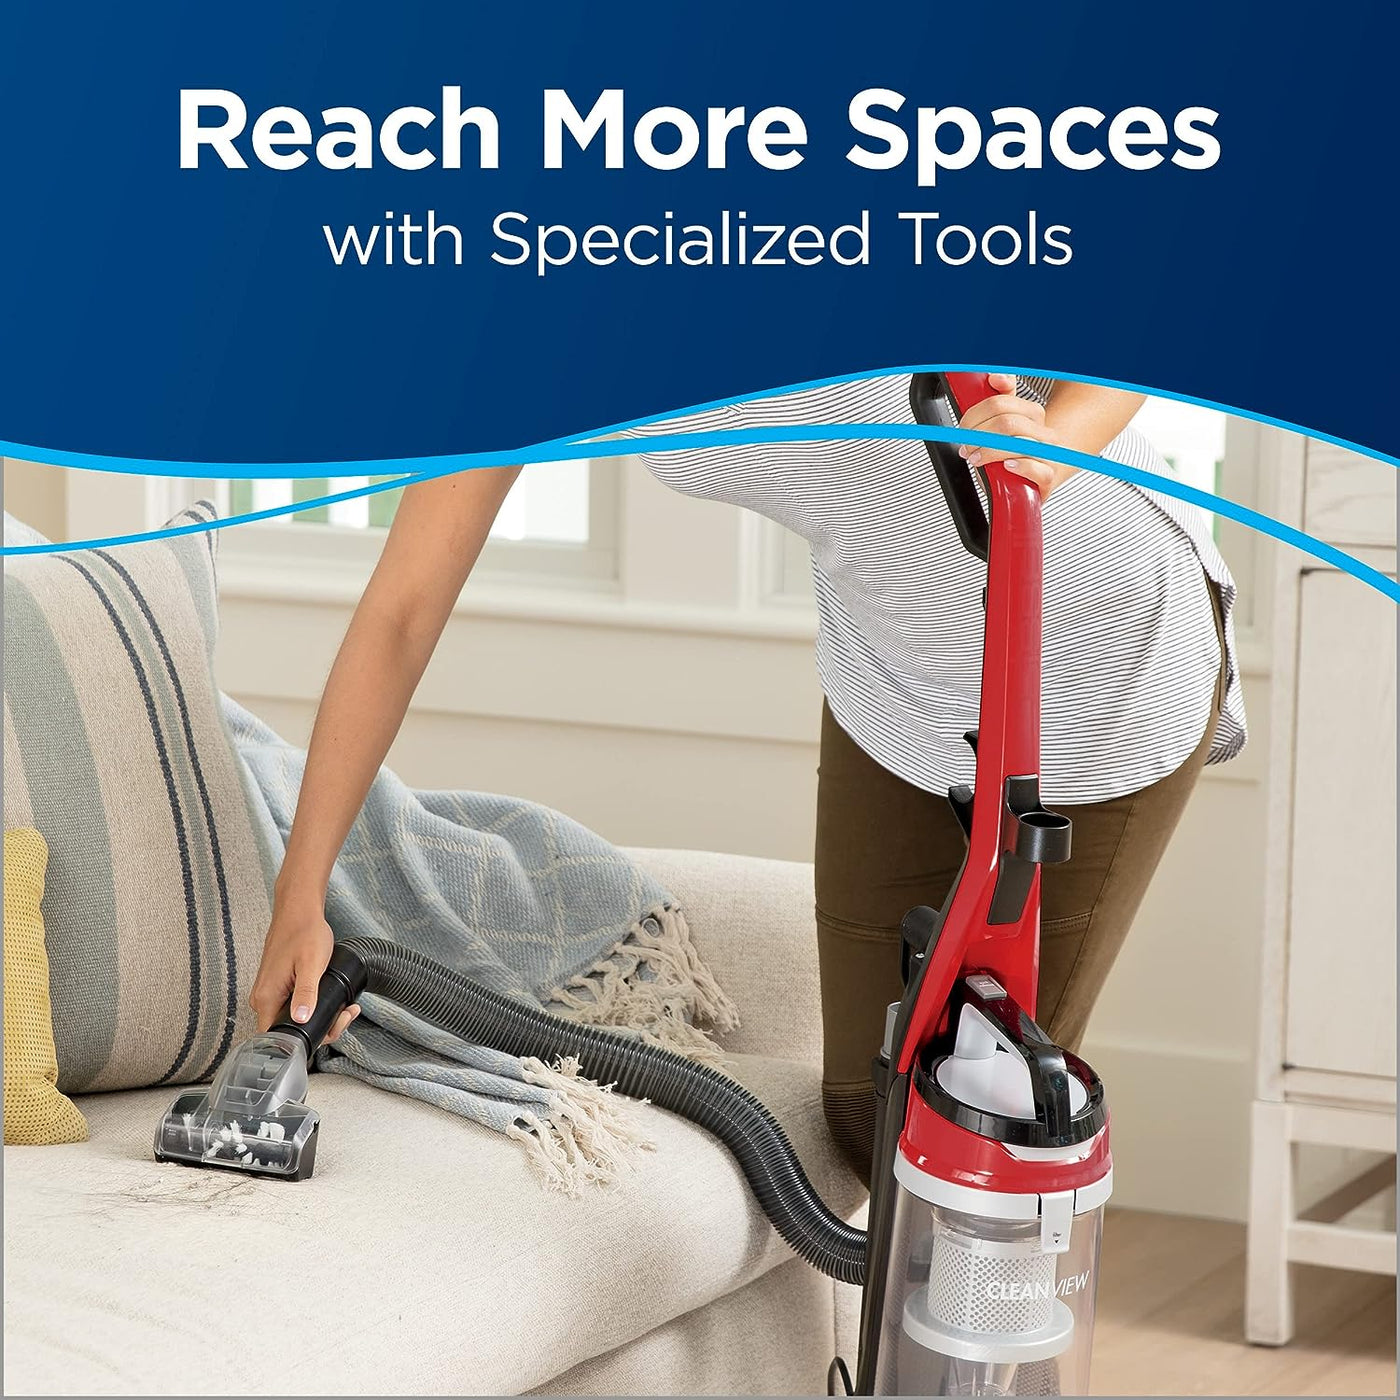 BISSELL CleanView Bagless Vacuum, Powerful Multi Cyclonic System - $100